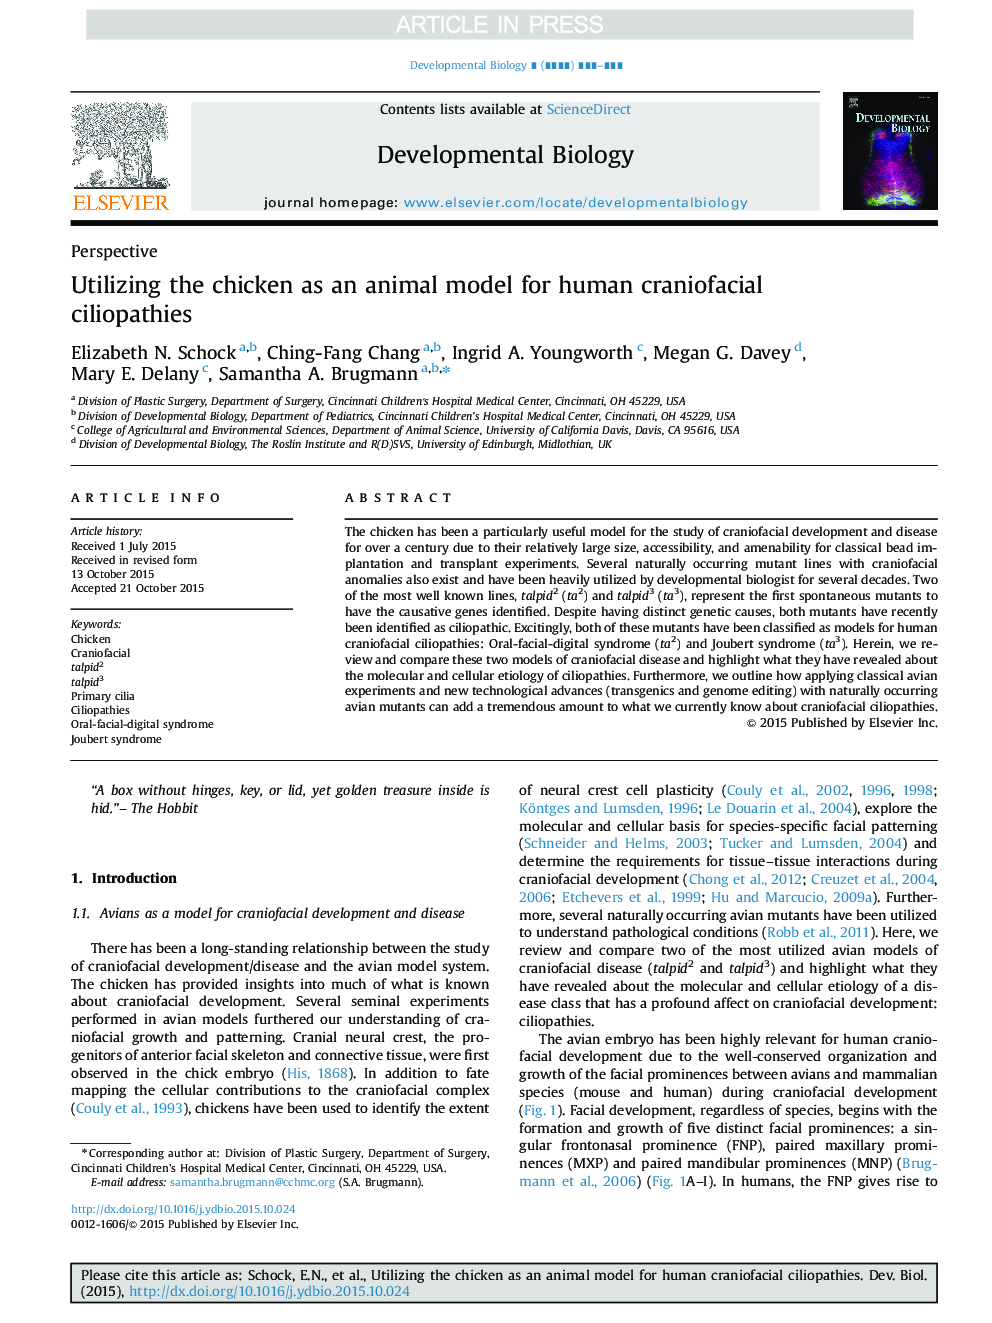 Utilizing the chicken as an animal model for human craniofacial ciliopathies